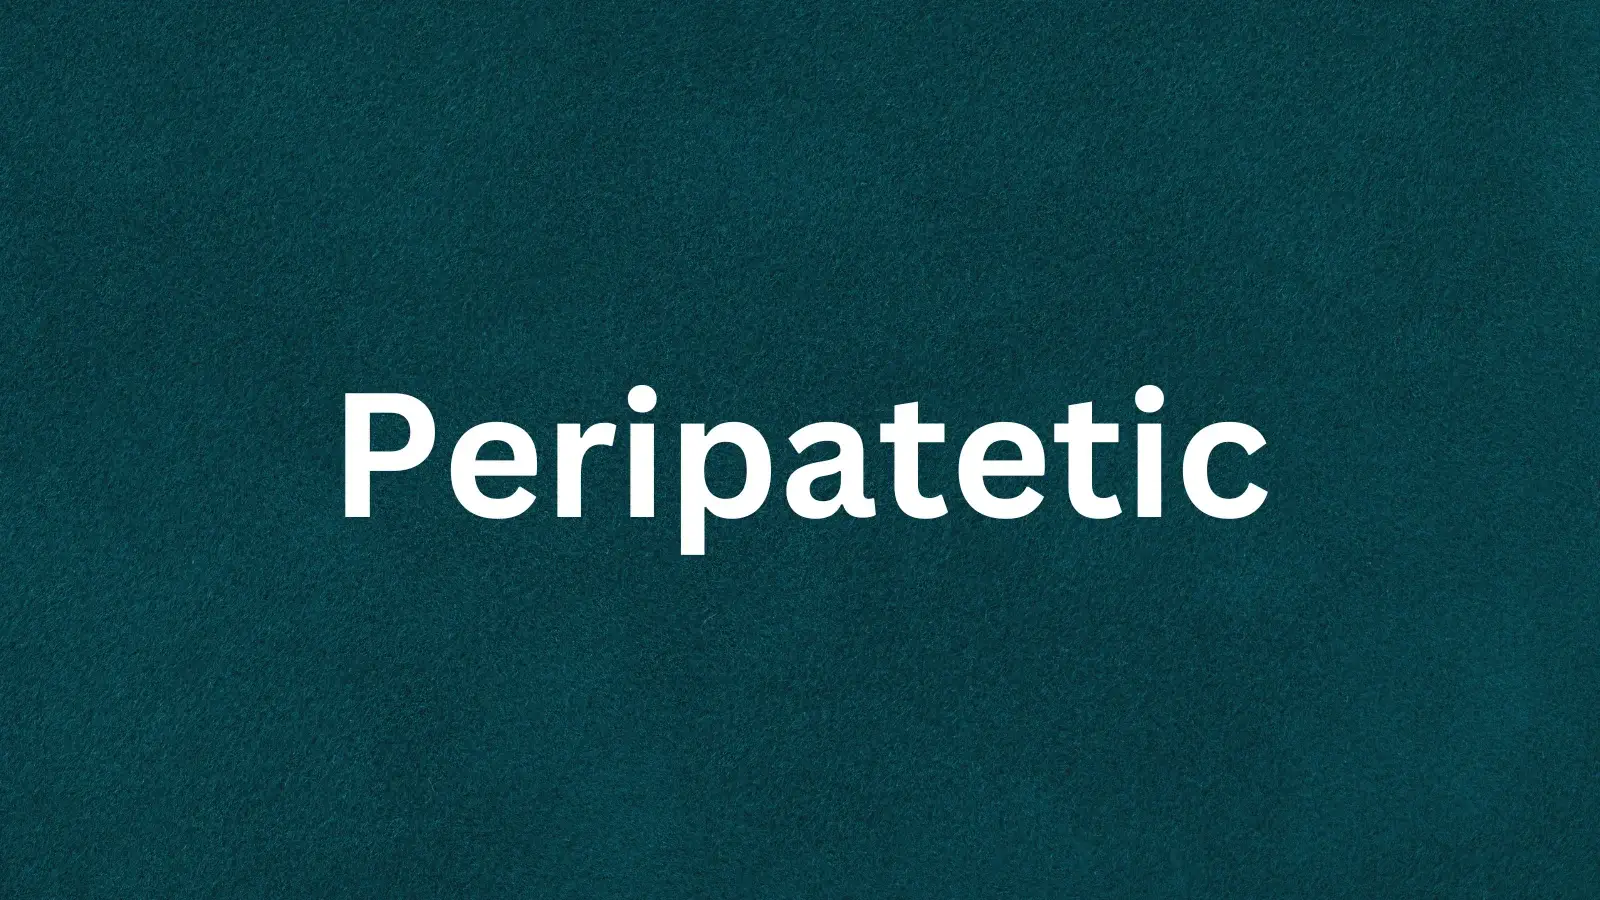 The word Peripatetic and its meaning